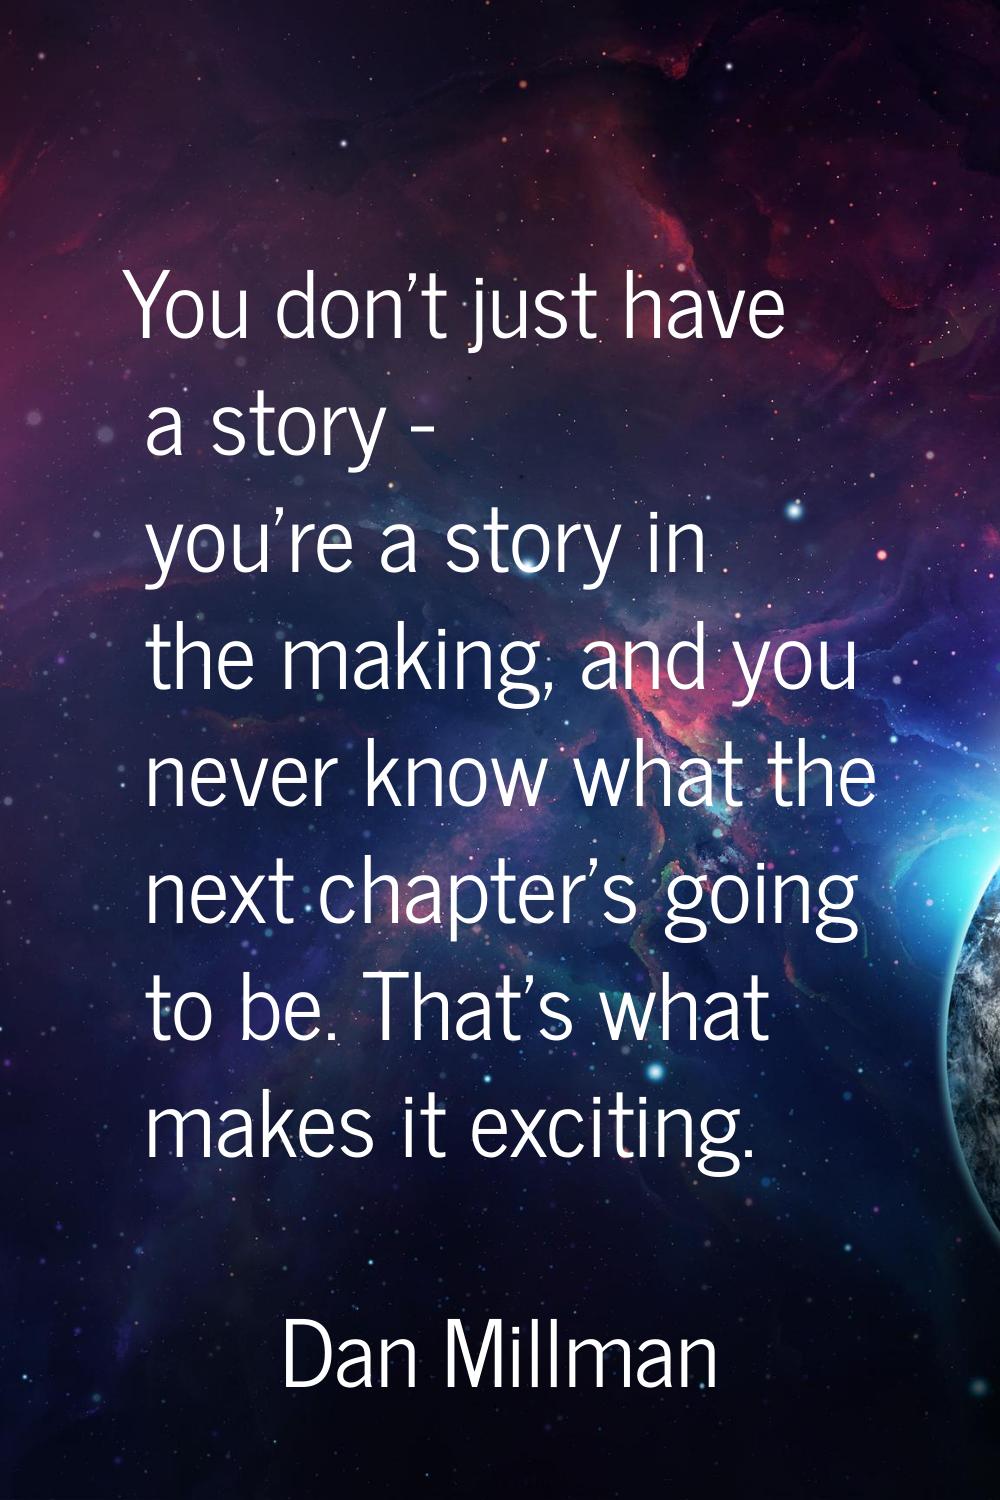 You don't just have a story - you're a story in the making, and you never know what the next chapte